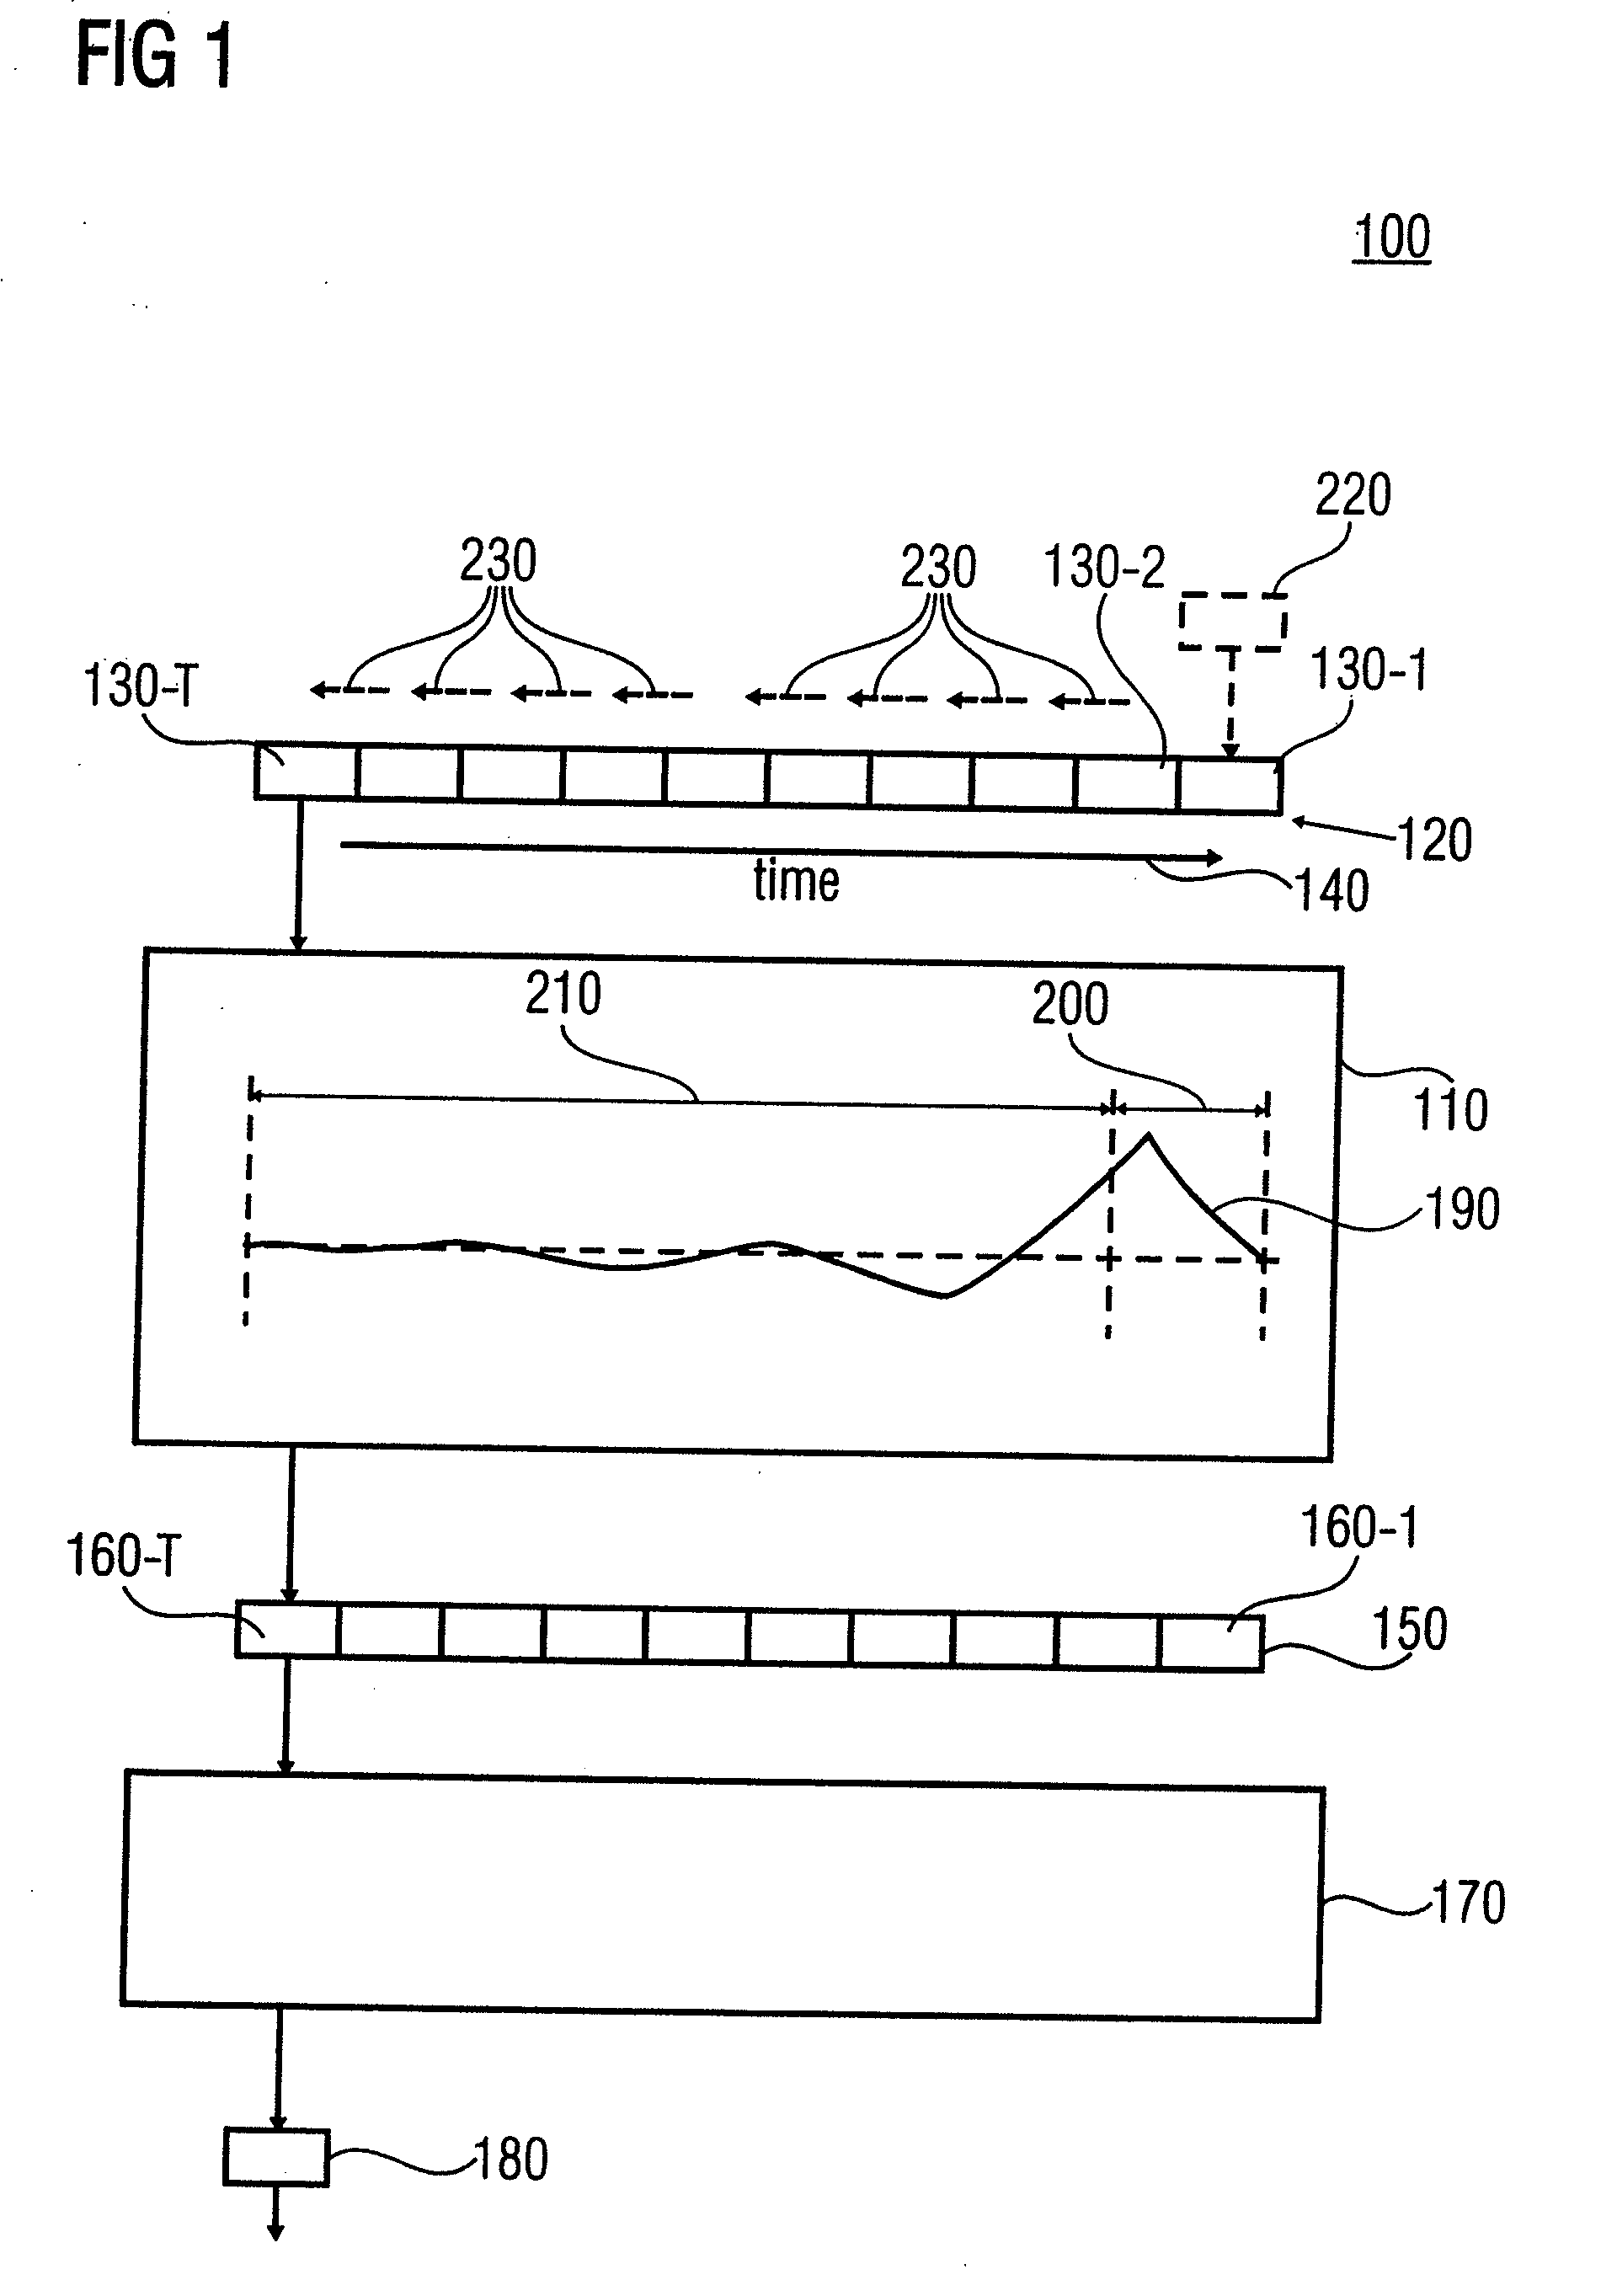 Apparatus and Method for Generating Audio Subband Values and Apparatus and Method for Generating Time-Domain Audio Samples